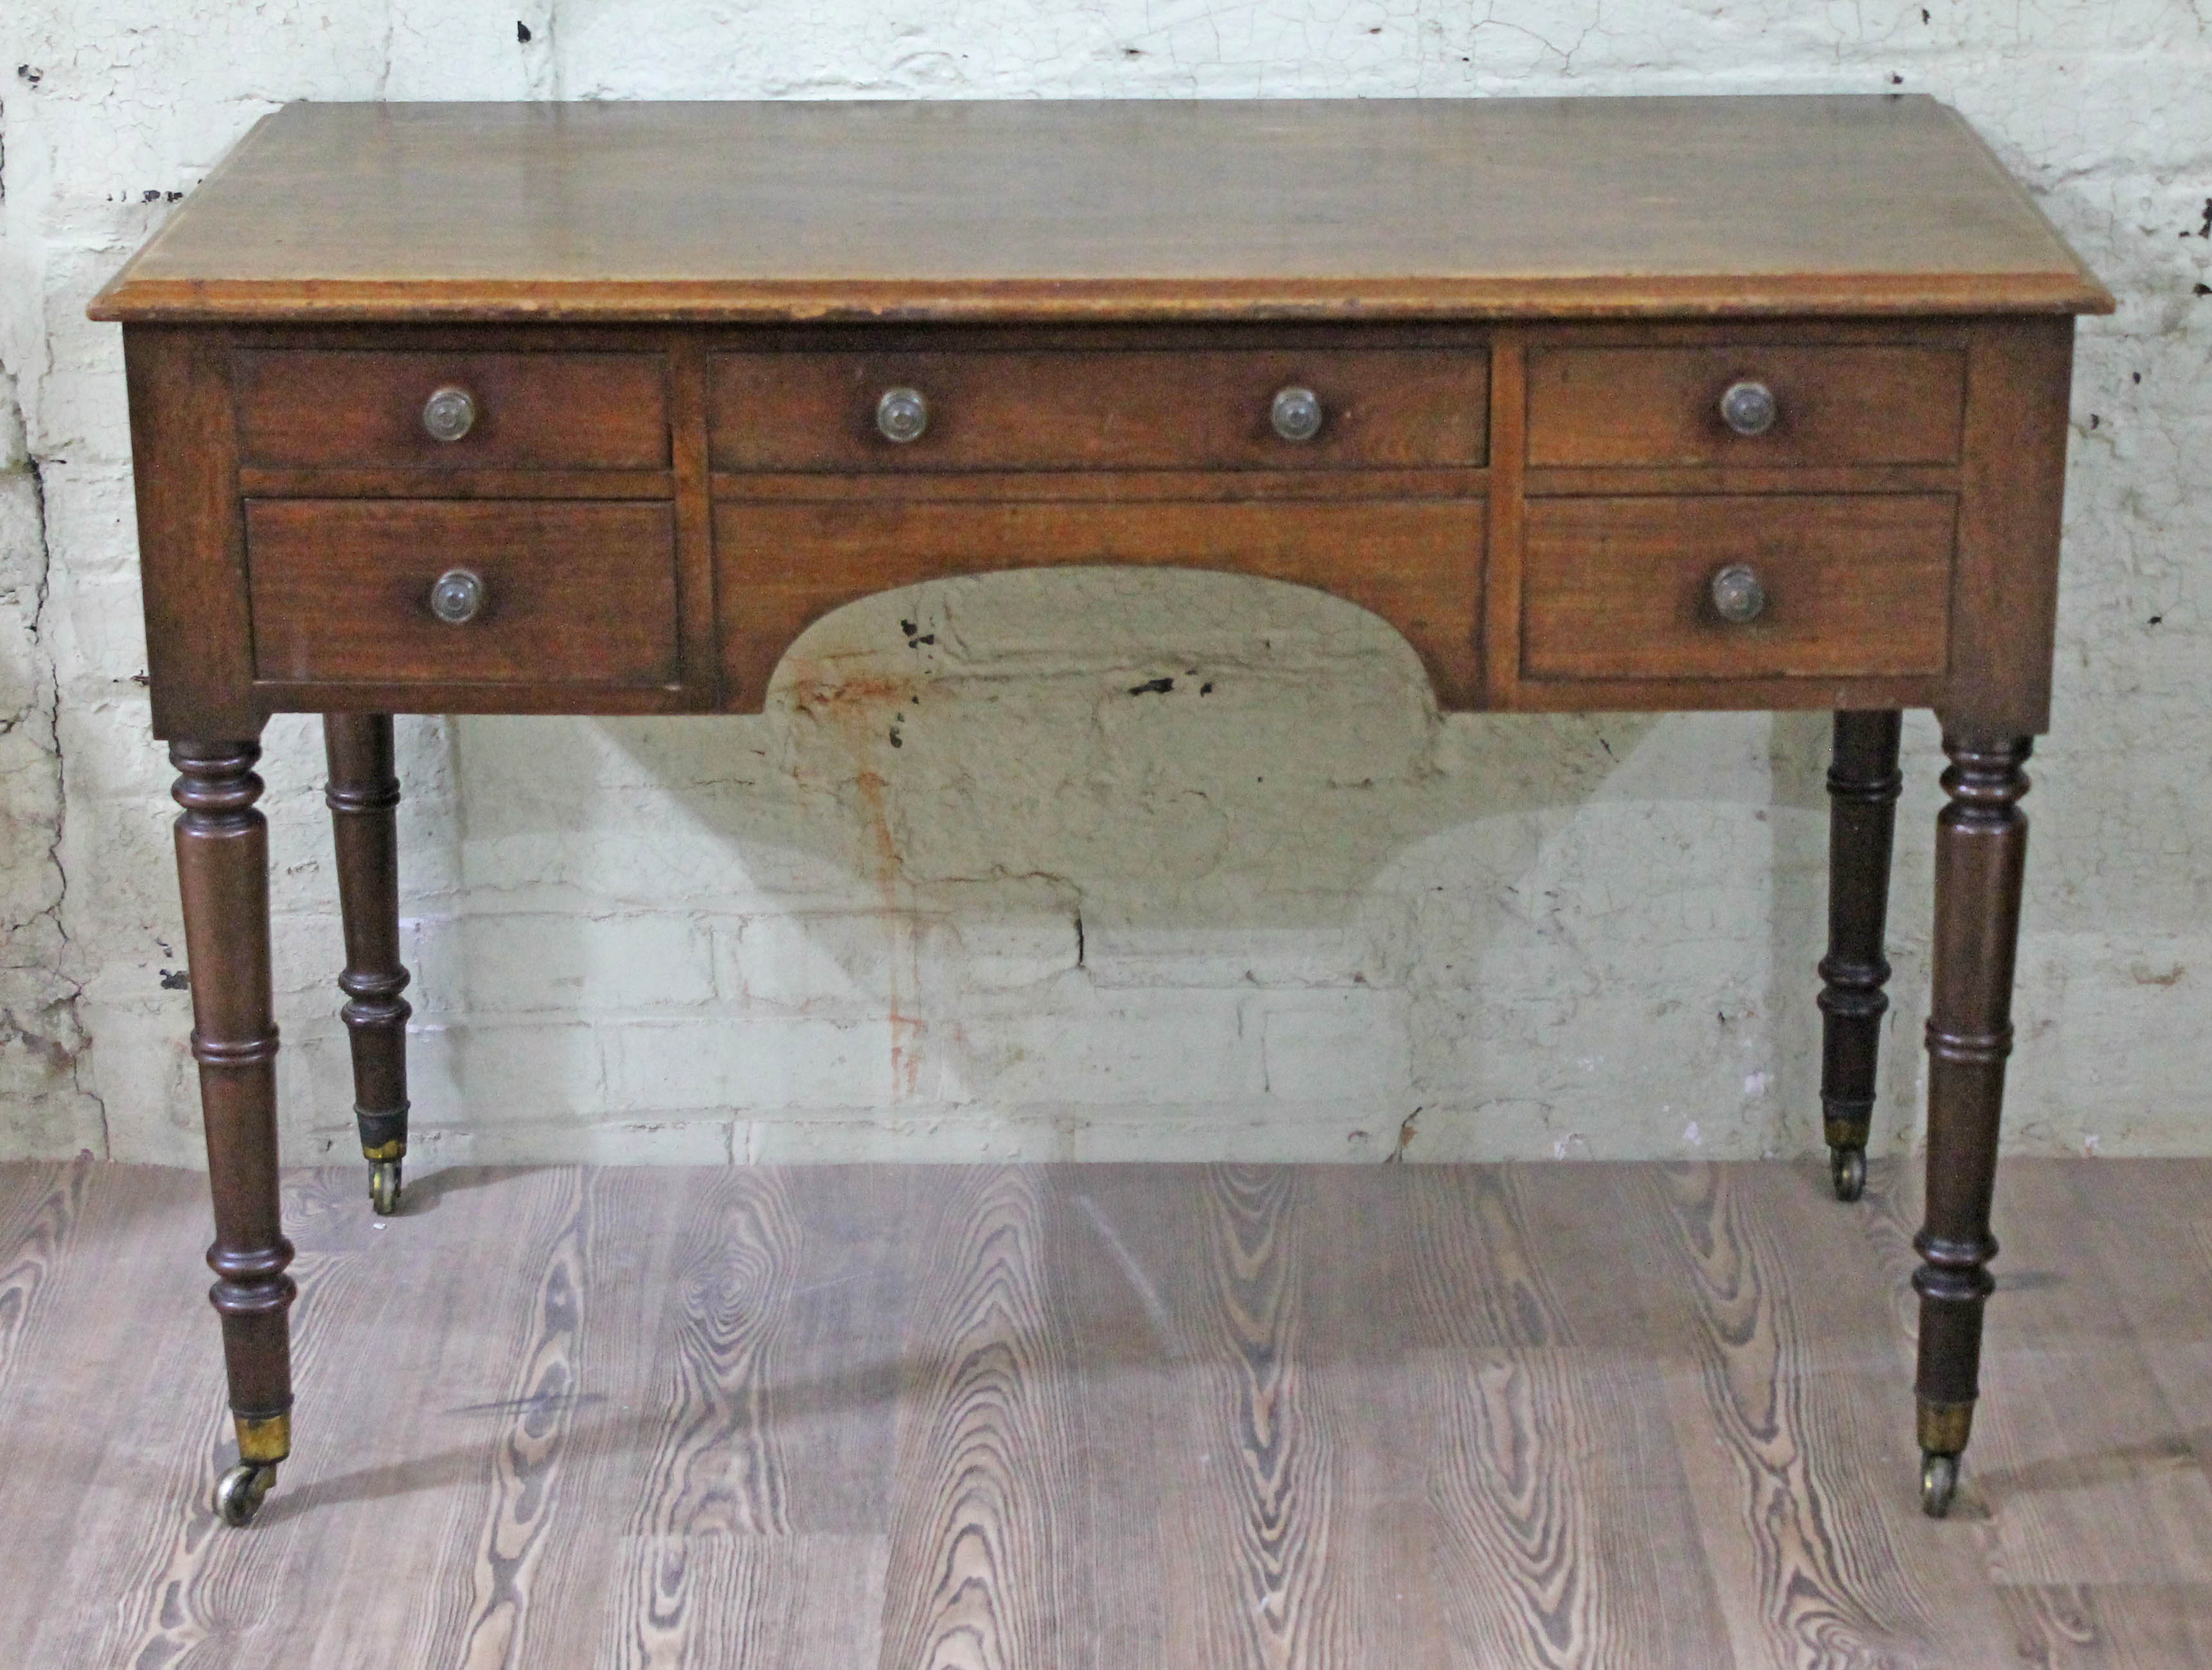 A Regency mahogany side table or desk with five drawers, turned legs with brass castors, width